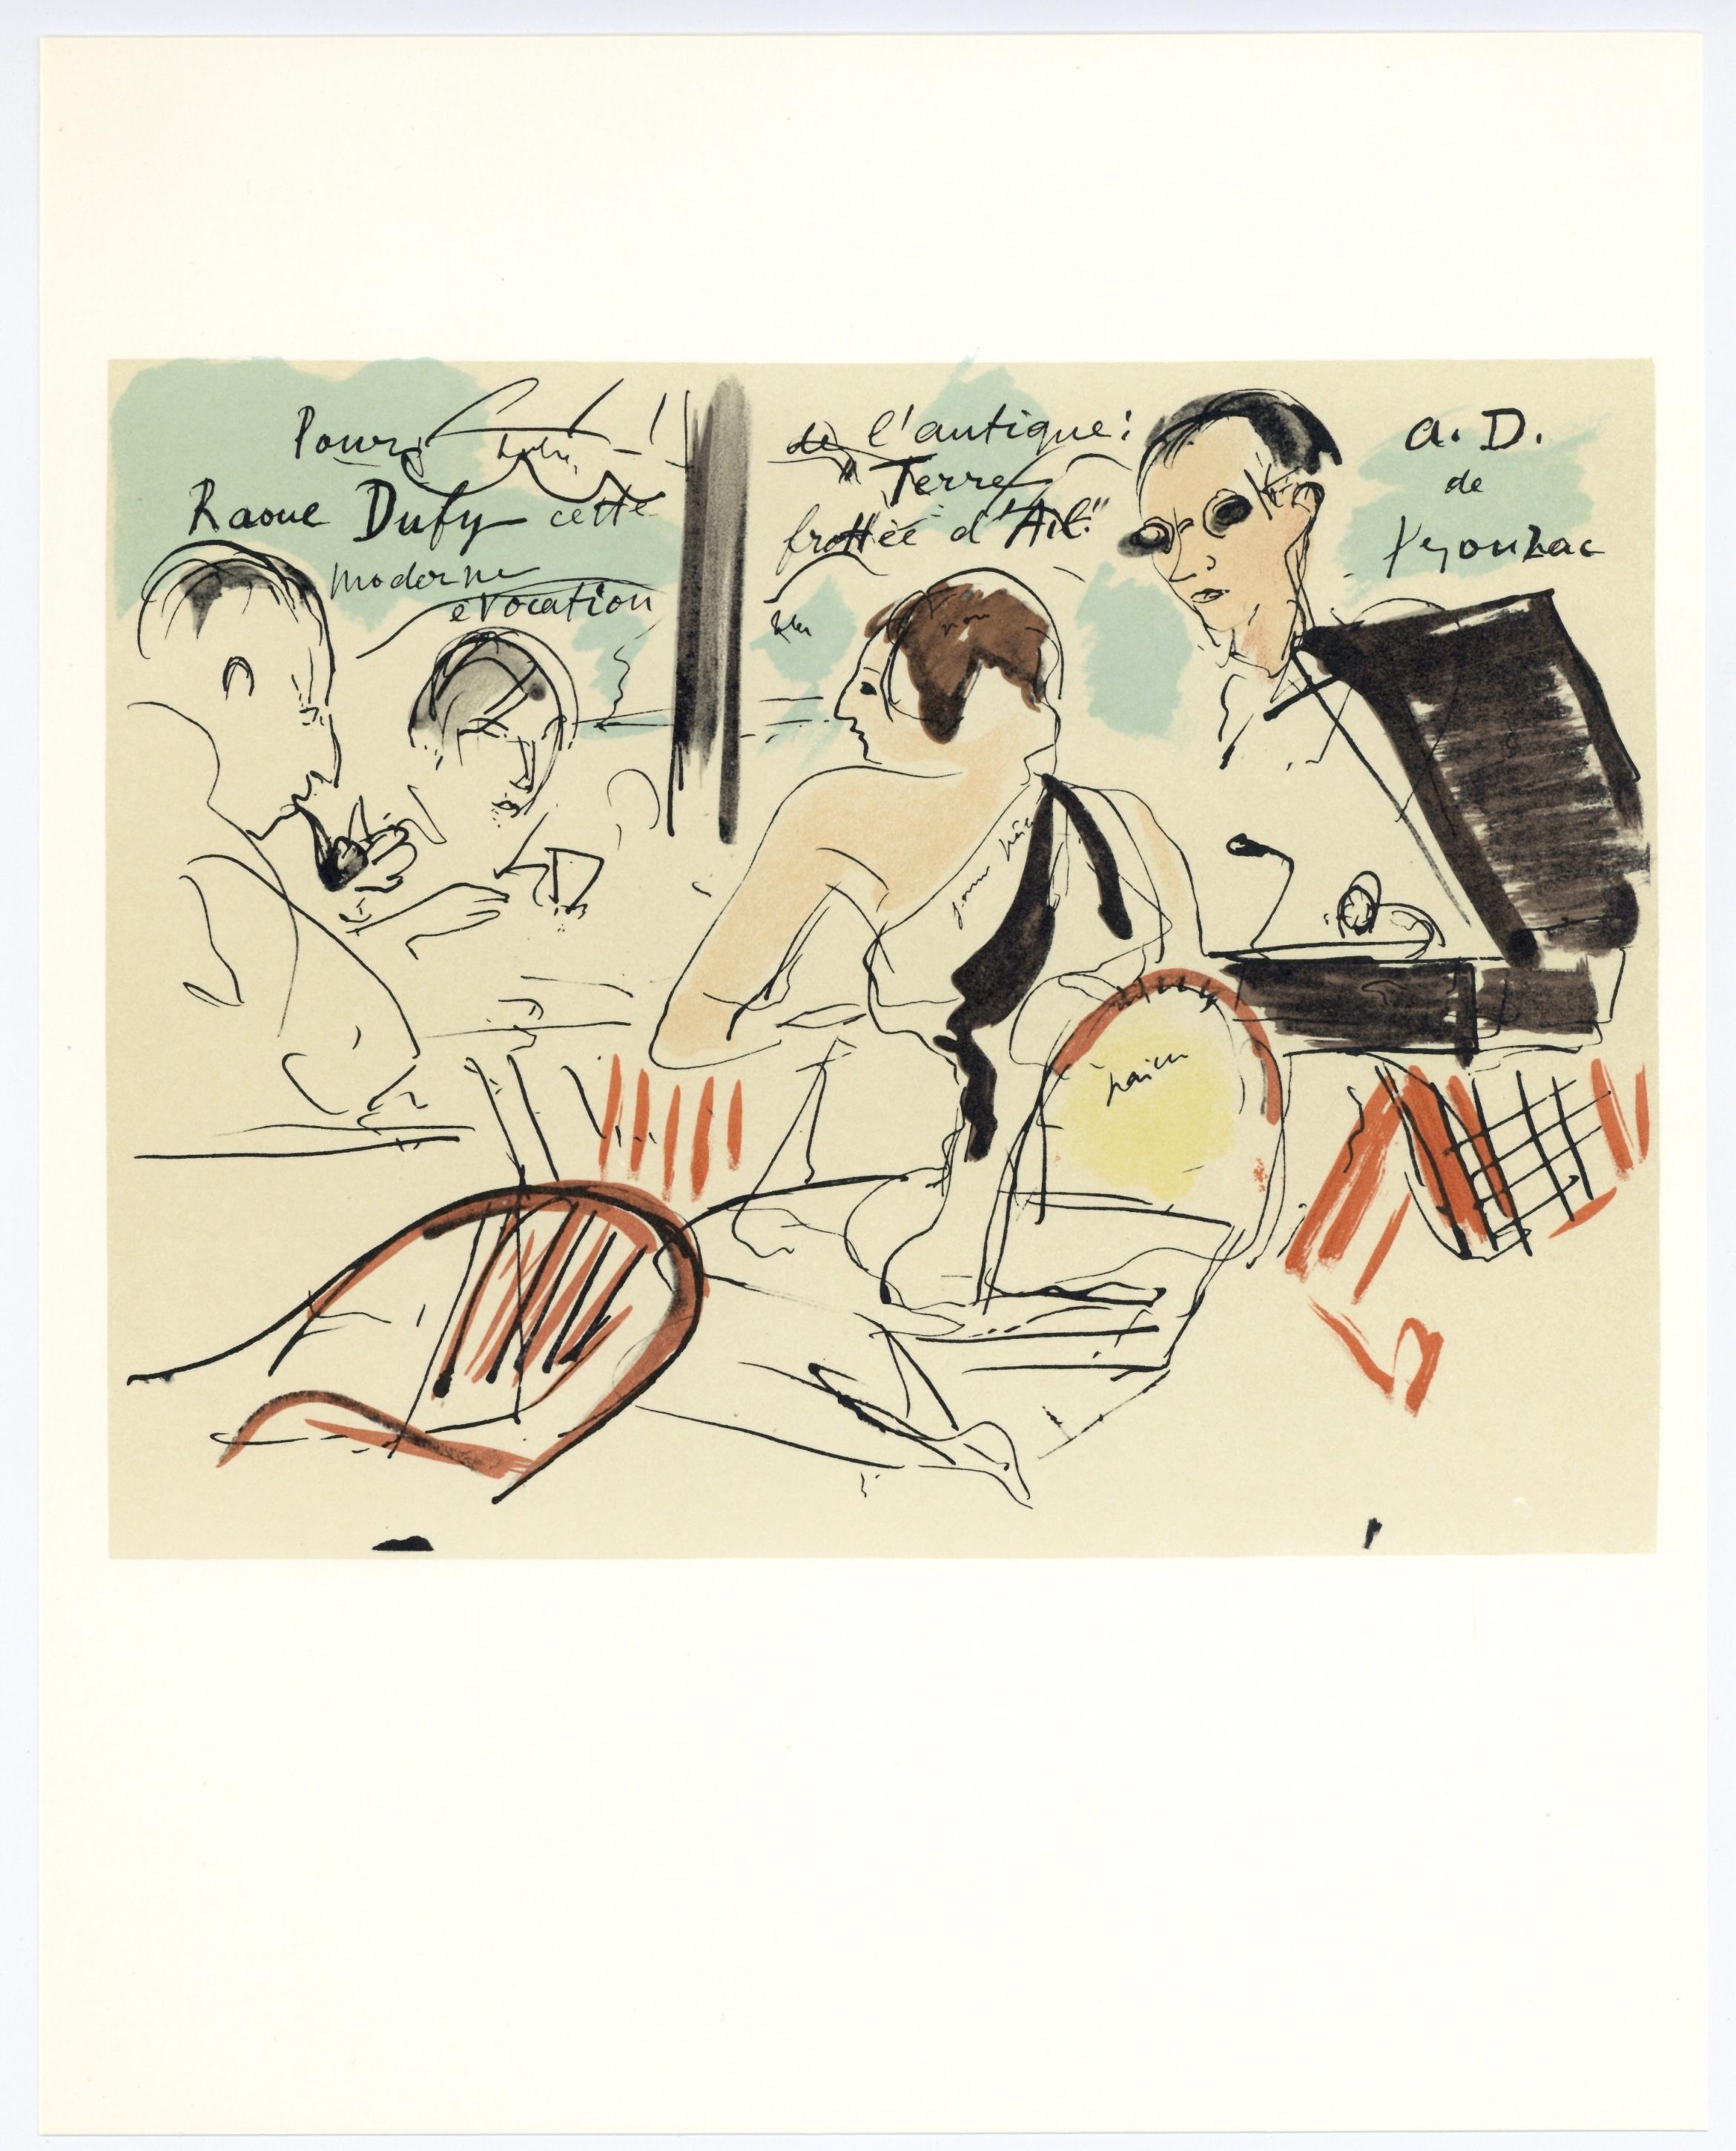 Lithograph on vélin d'Arches Arjomari paper. Unsigned and unnumbered, as issued. Good condition. Notes: From the folio, Lettre à mon peintre Raoul Dufy, 1965. Published by Librairie académique Perrin et Cie, Paris; printed by Fernand Mourlot, Paris,